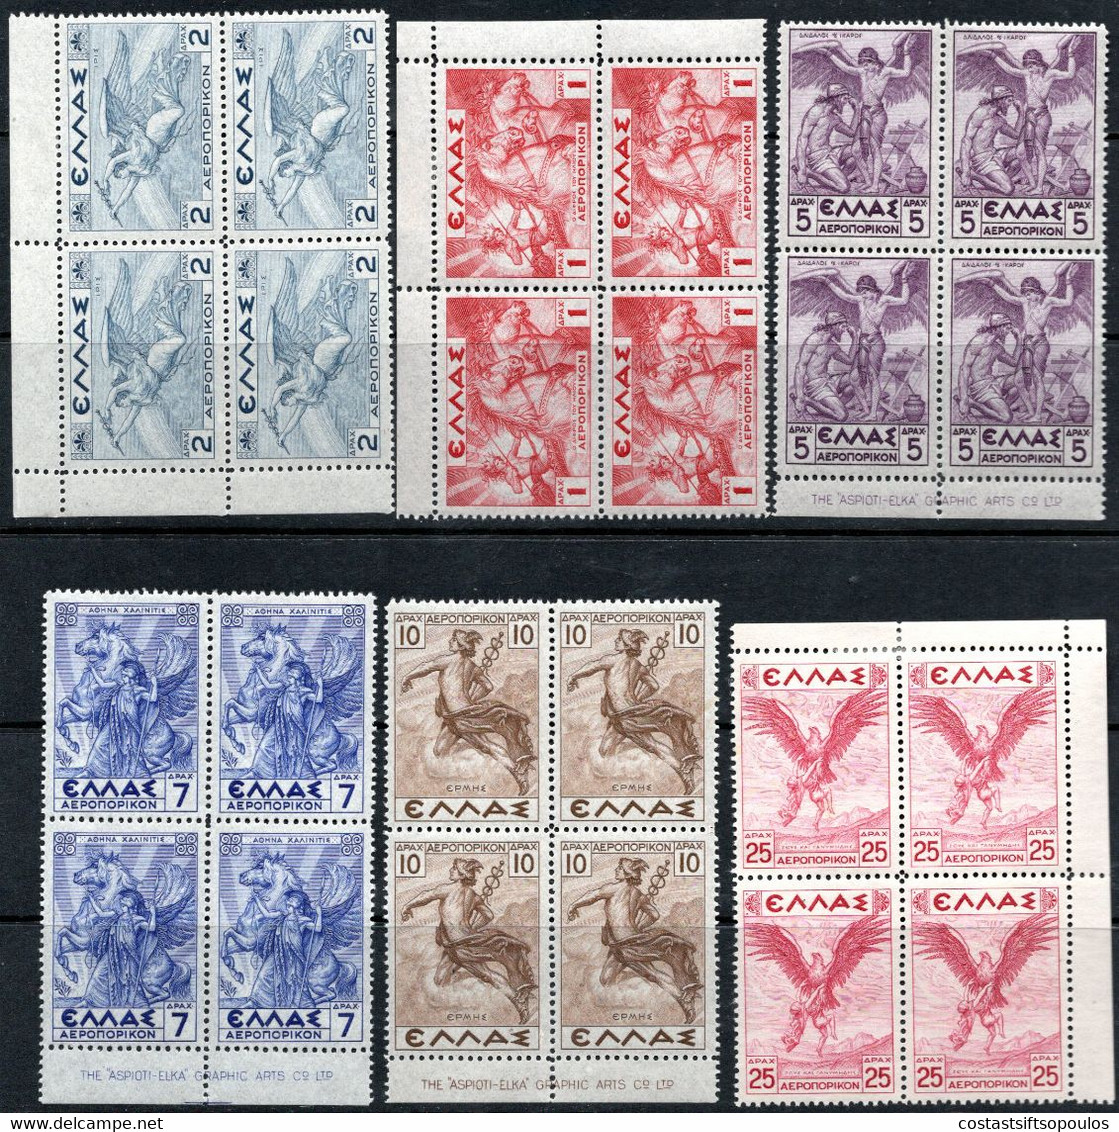 941.GREECE.1935 MYTHOLOGICAL ISSUE # 22-30 BLOCKS OF 4 (3 MNH,1 MH)4 SCANS - Neufs